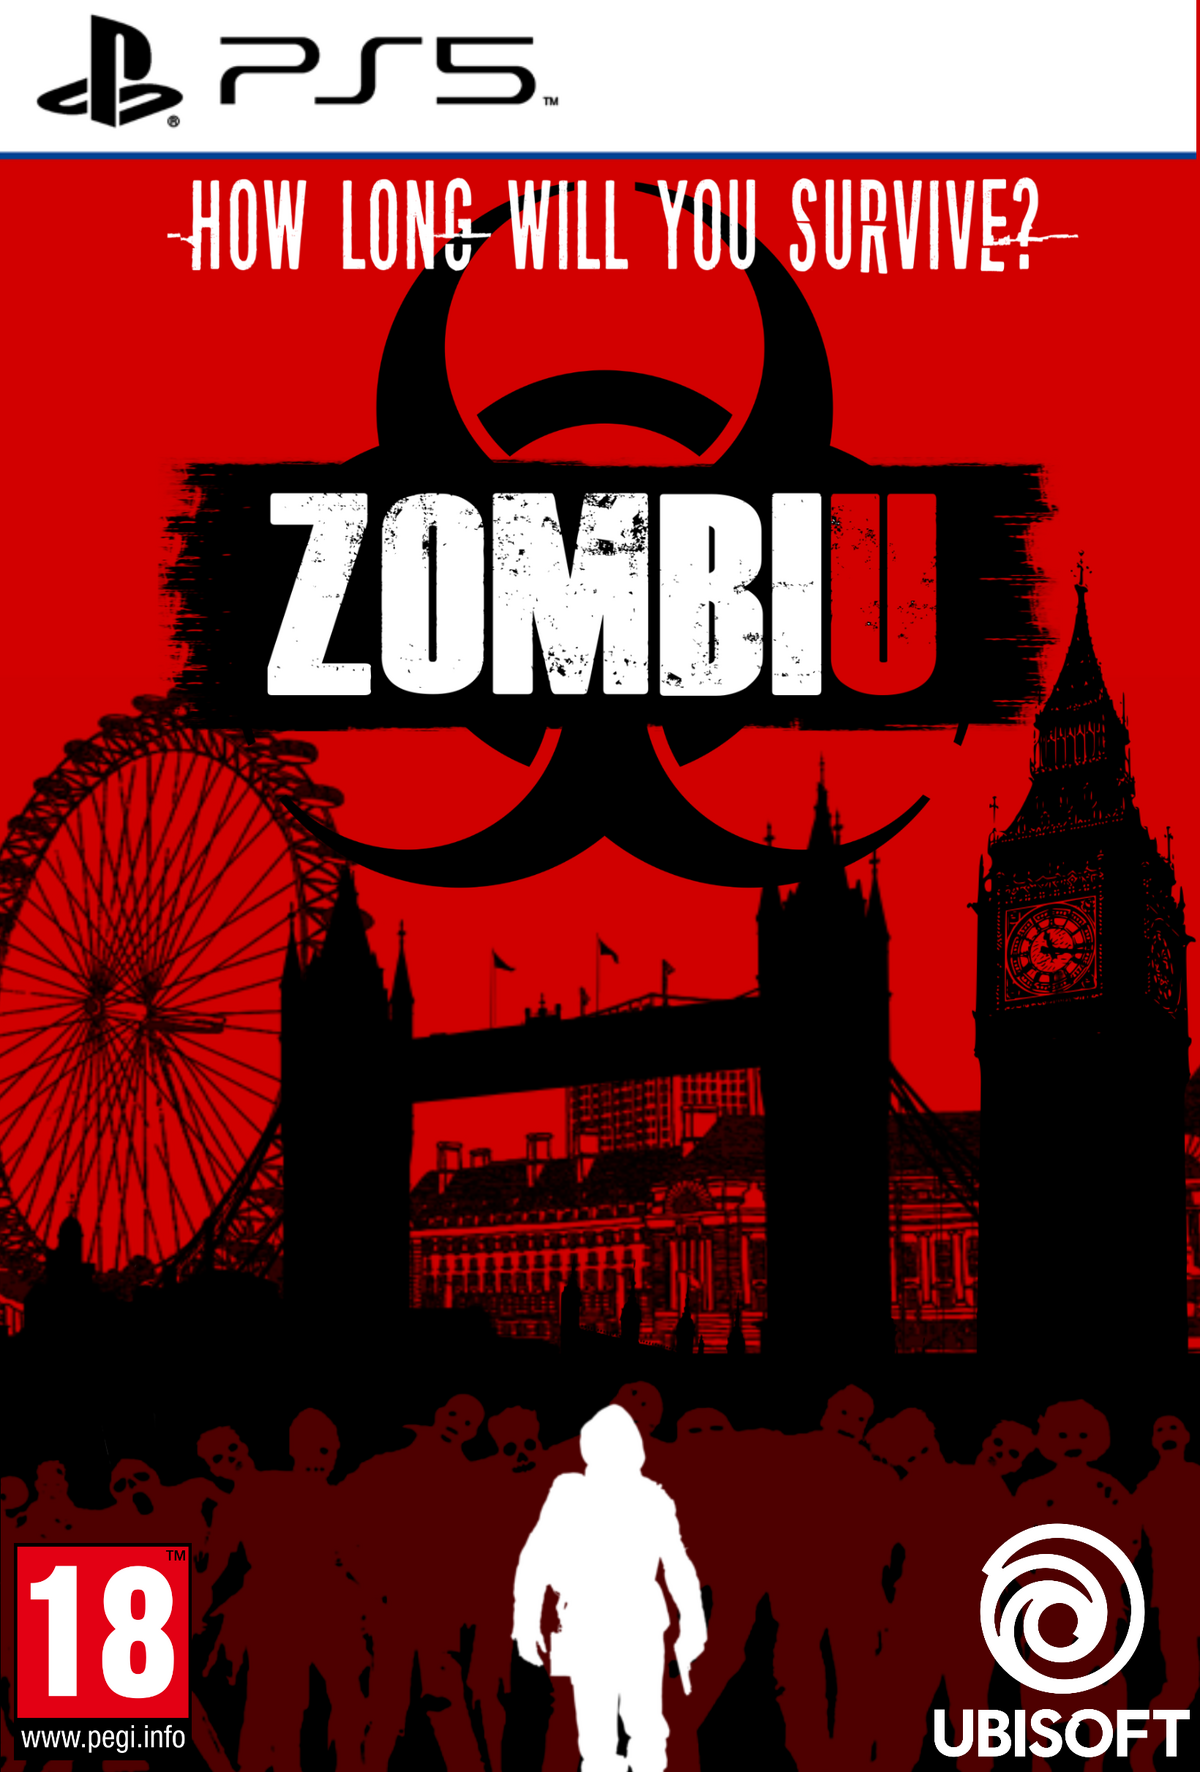 ZombiU to relaunch as Zombi later this year